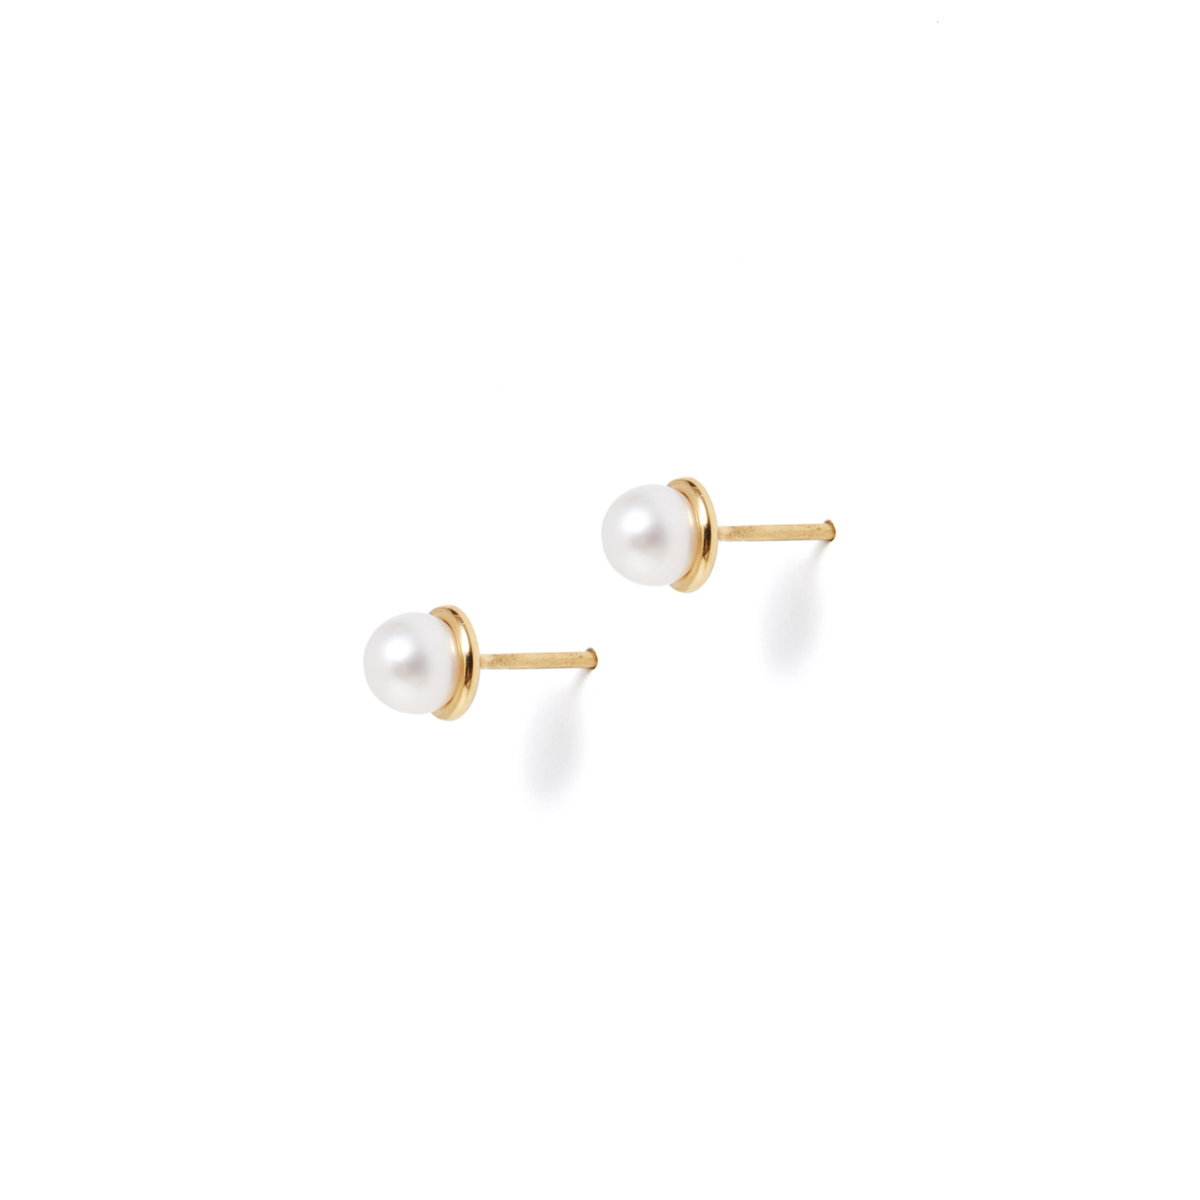 COLD WHITE 4mm PEARL GOLD EARRINGS